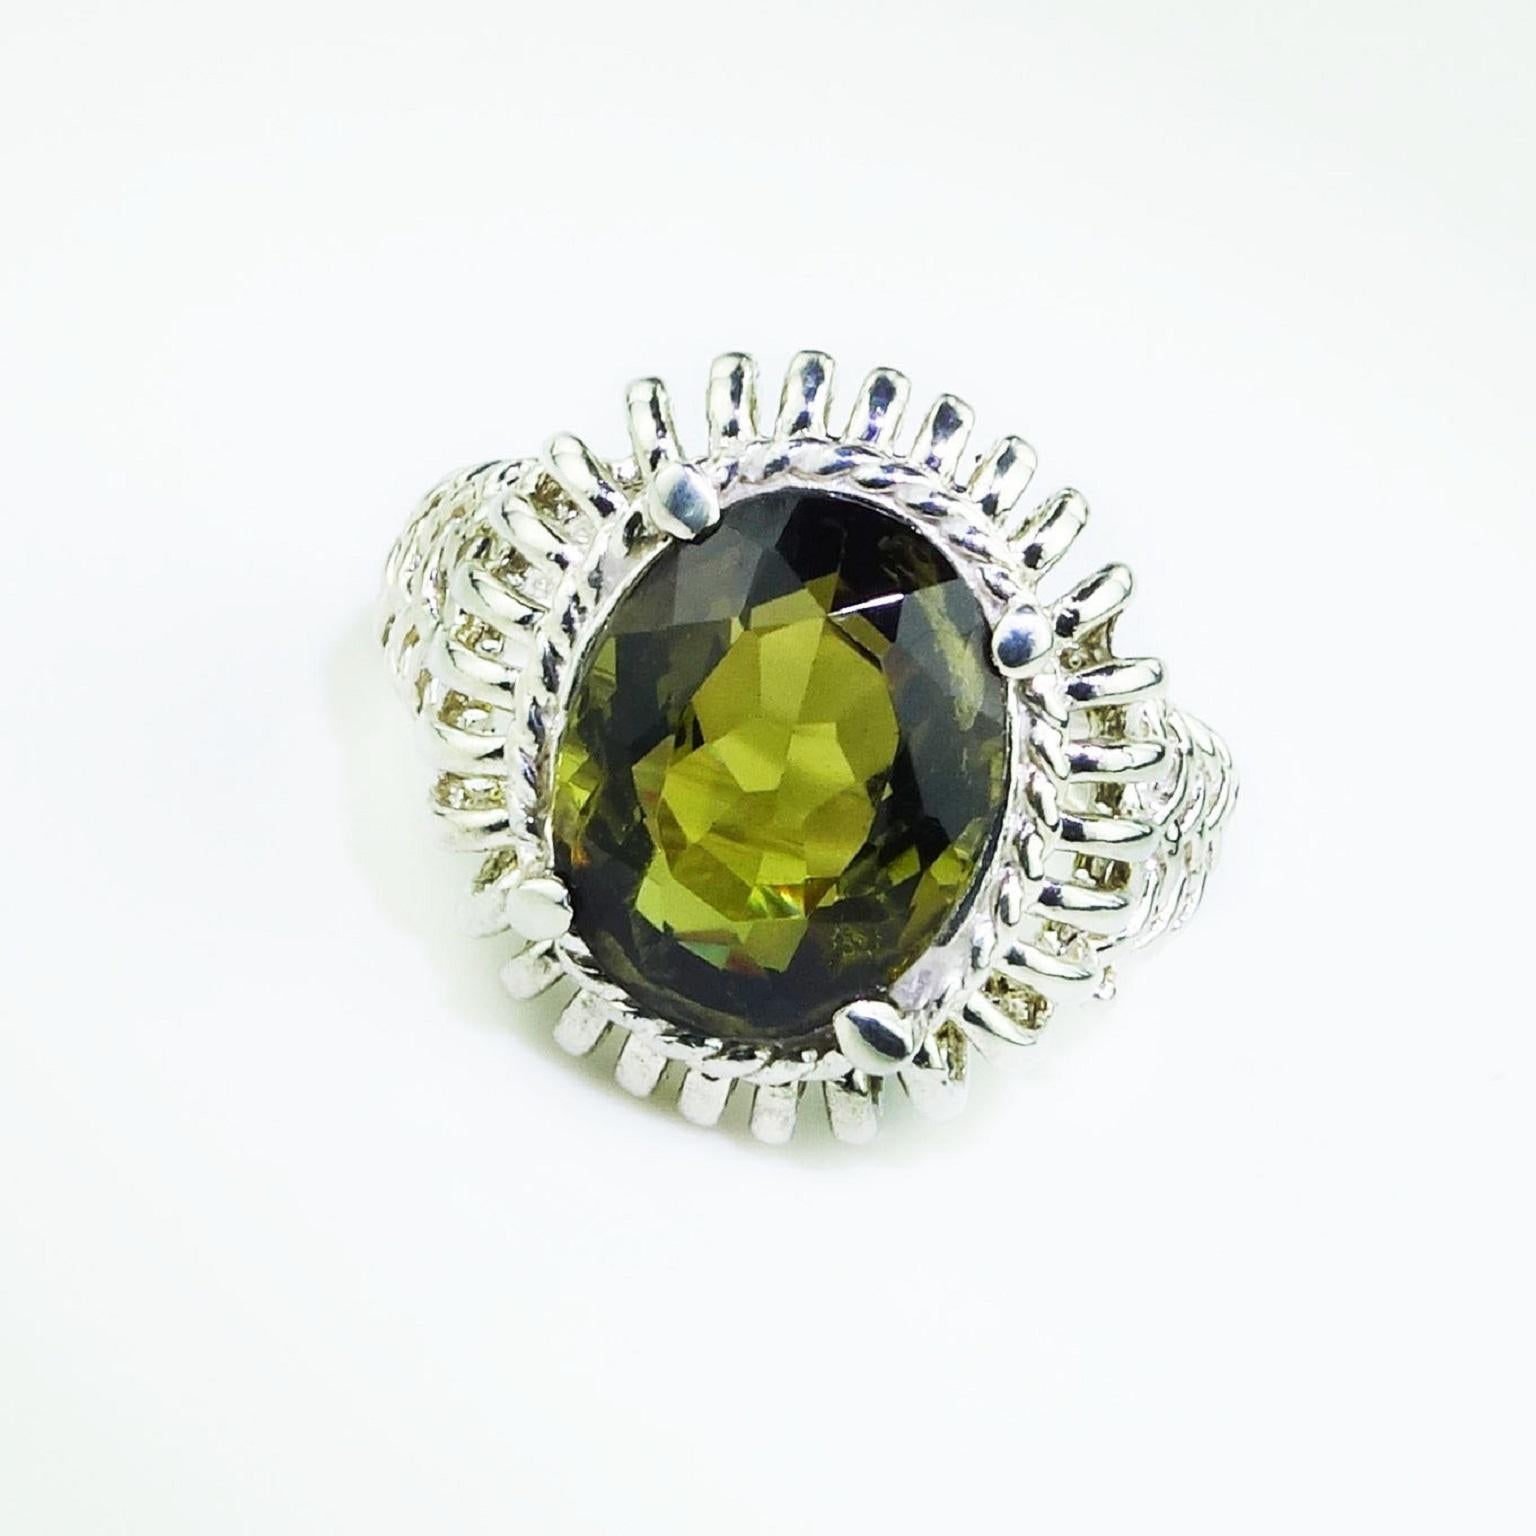 Custom made, lovely, sparkling Dichroic  Andalusite of 5.86ct set in Ornate Sterling Silver Basket with detail continuing down the ring shank. The oval Andalusite appears Green or Brown depending on the way you look at it,  because of its dichroic